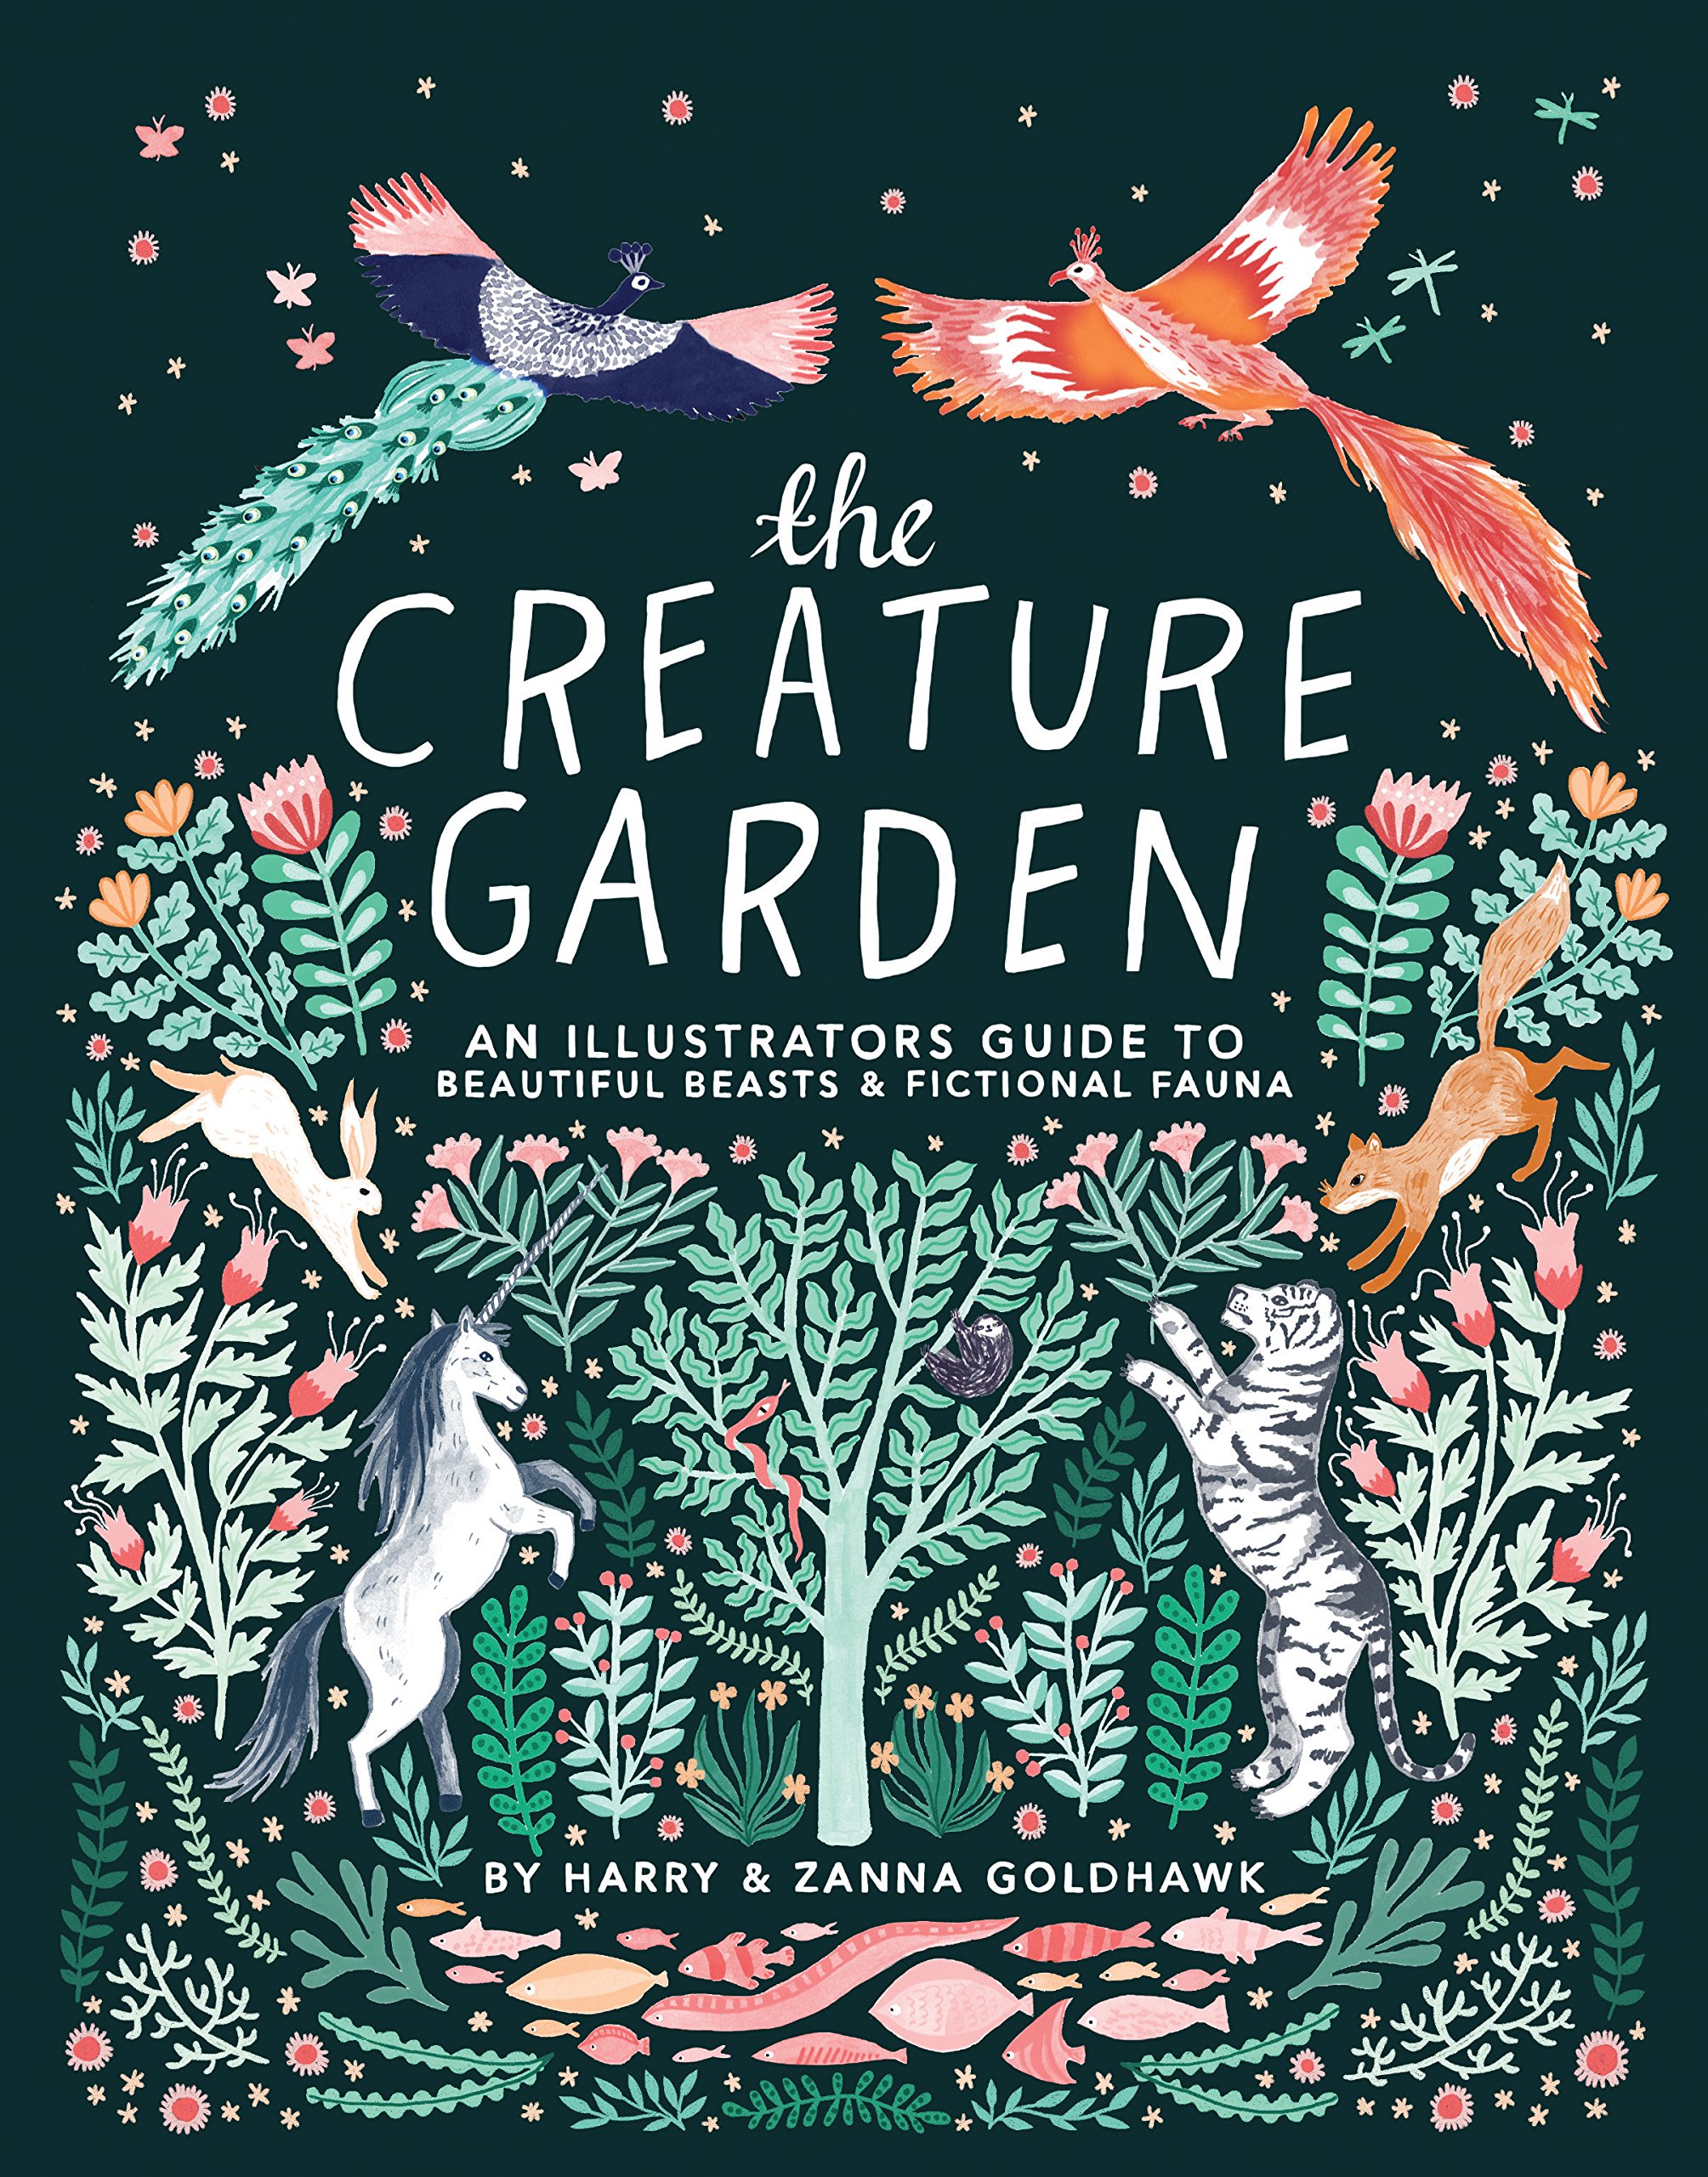 The Creature Garden: An Illustrator’s Guide to Beautiful Beasts & Fictional Fauna Giveaway